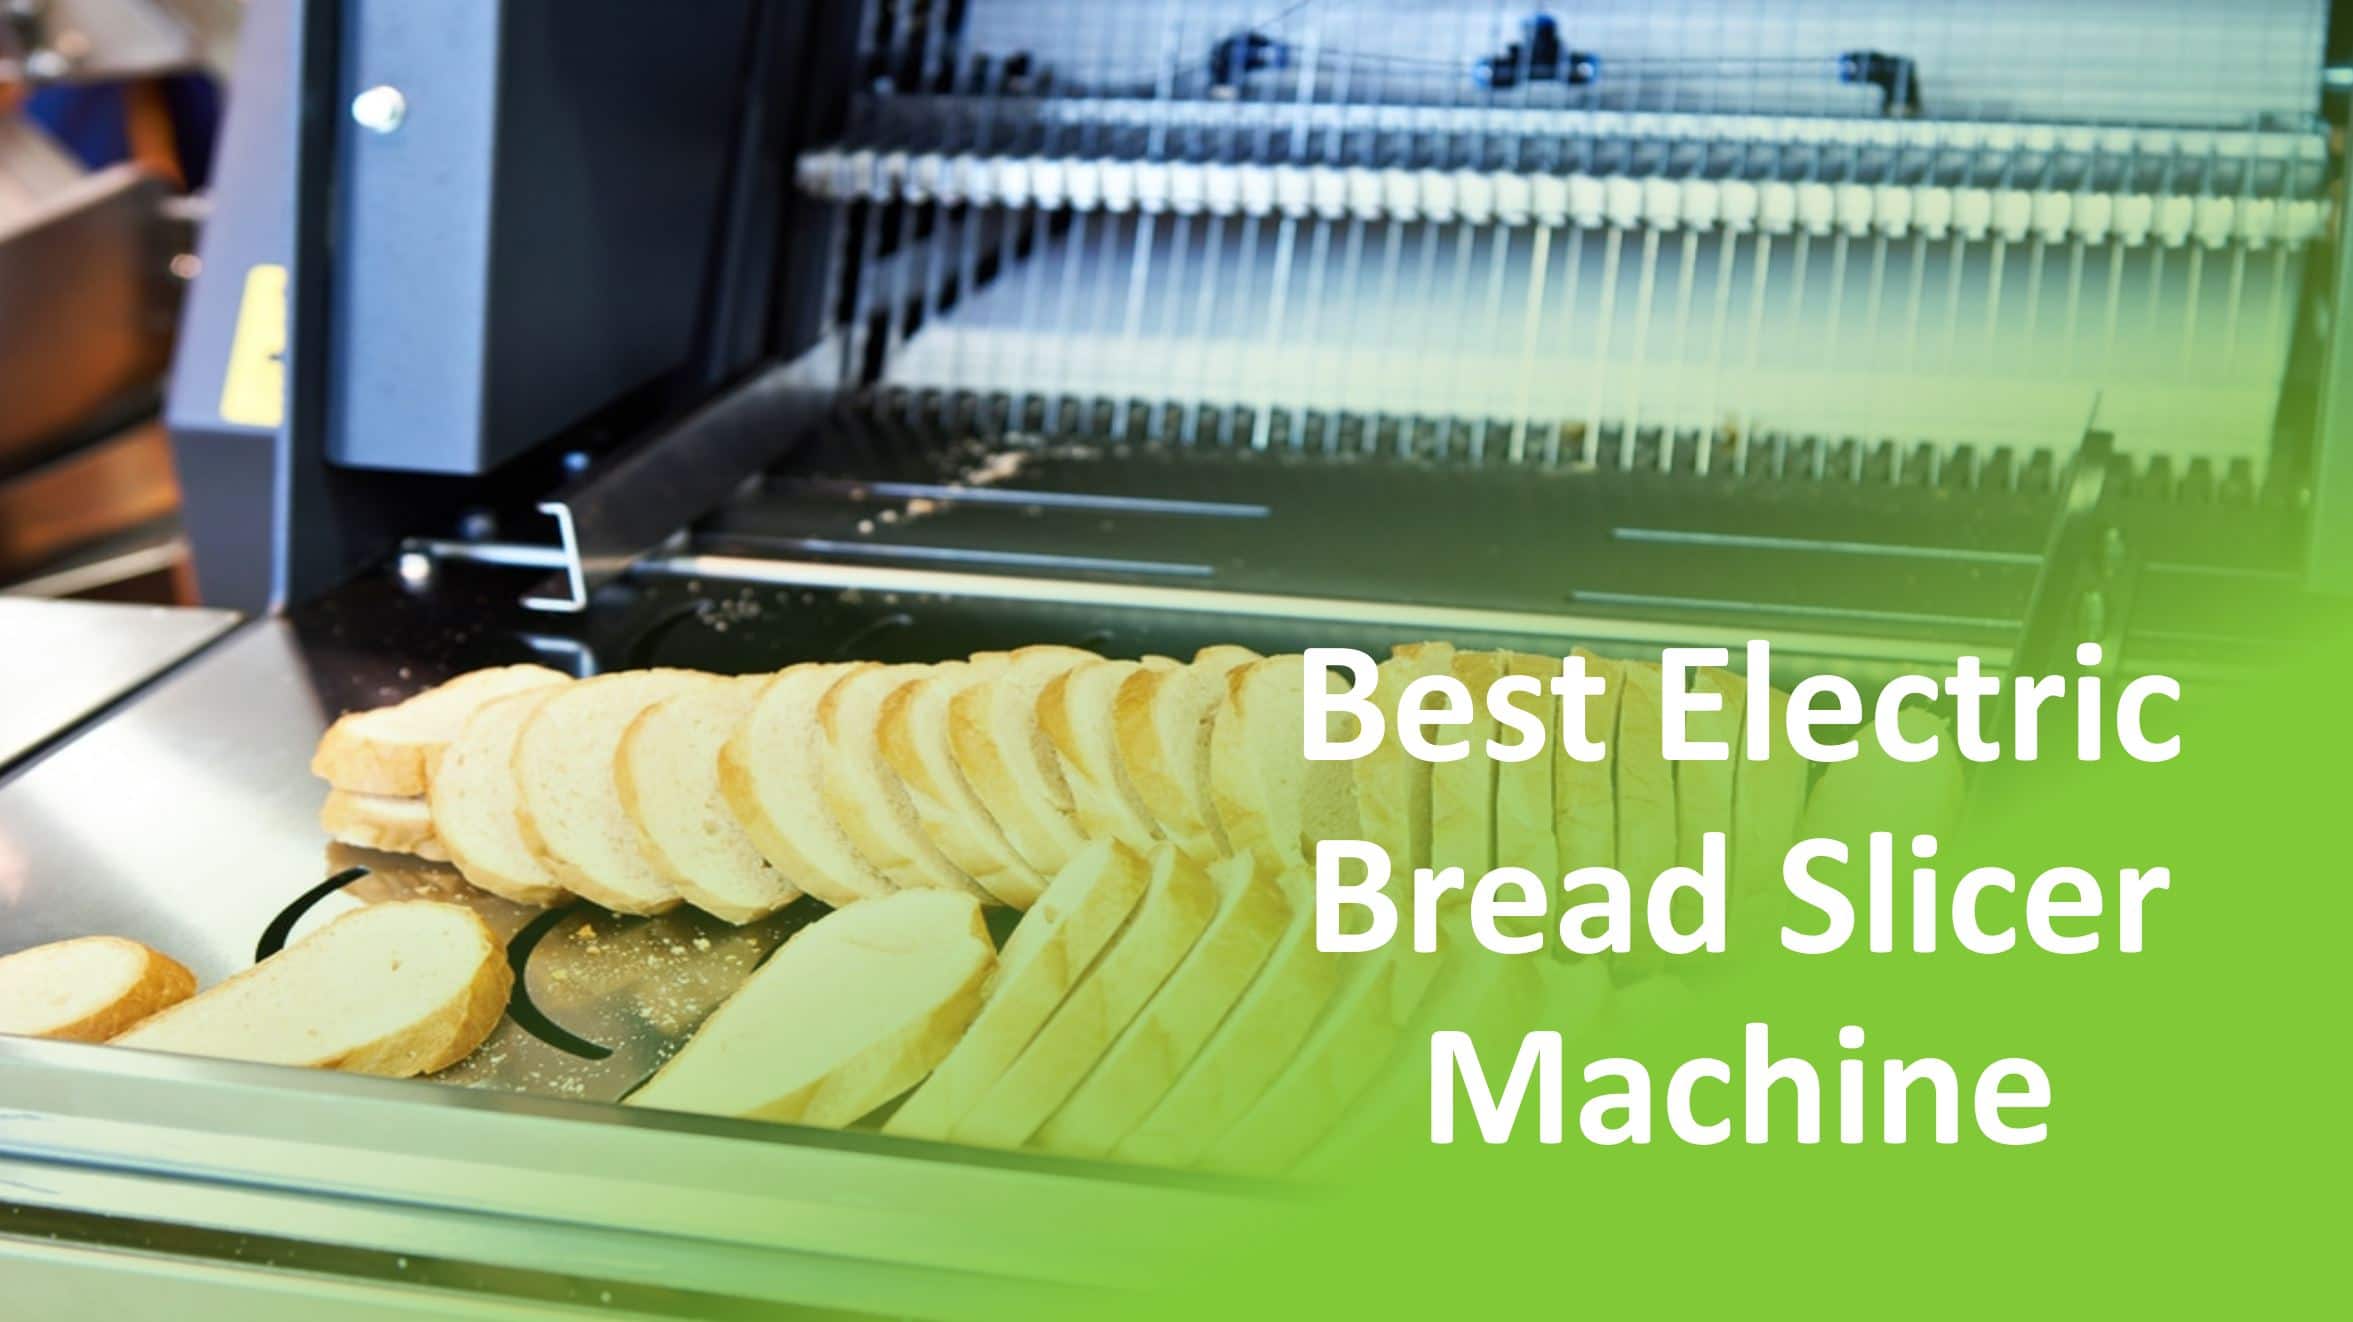 Best Electric Bread Slicer Machine For Home Use (Reviews & Guide)